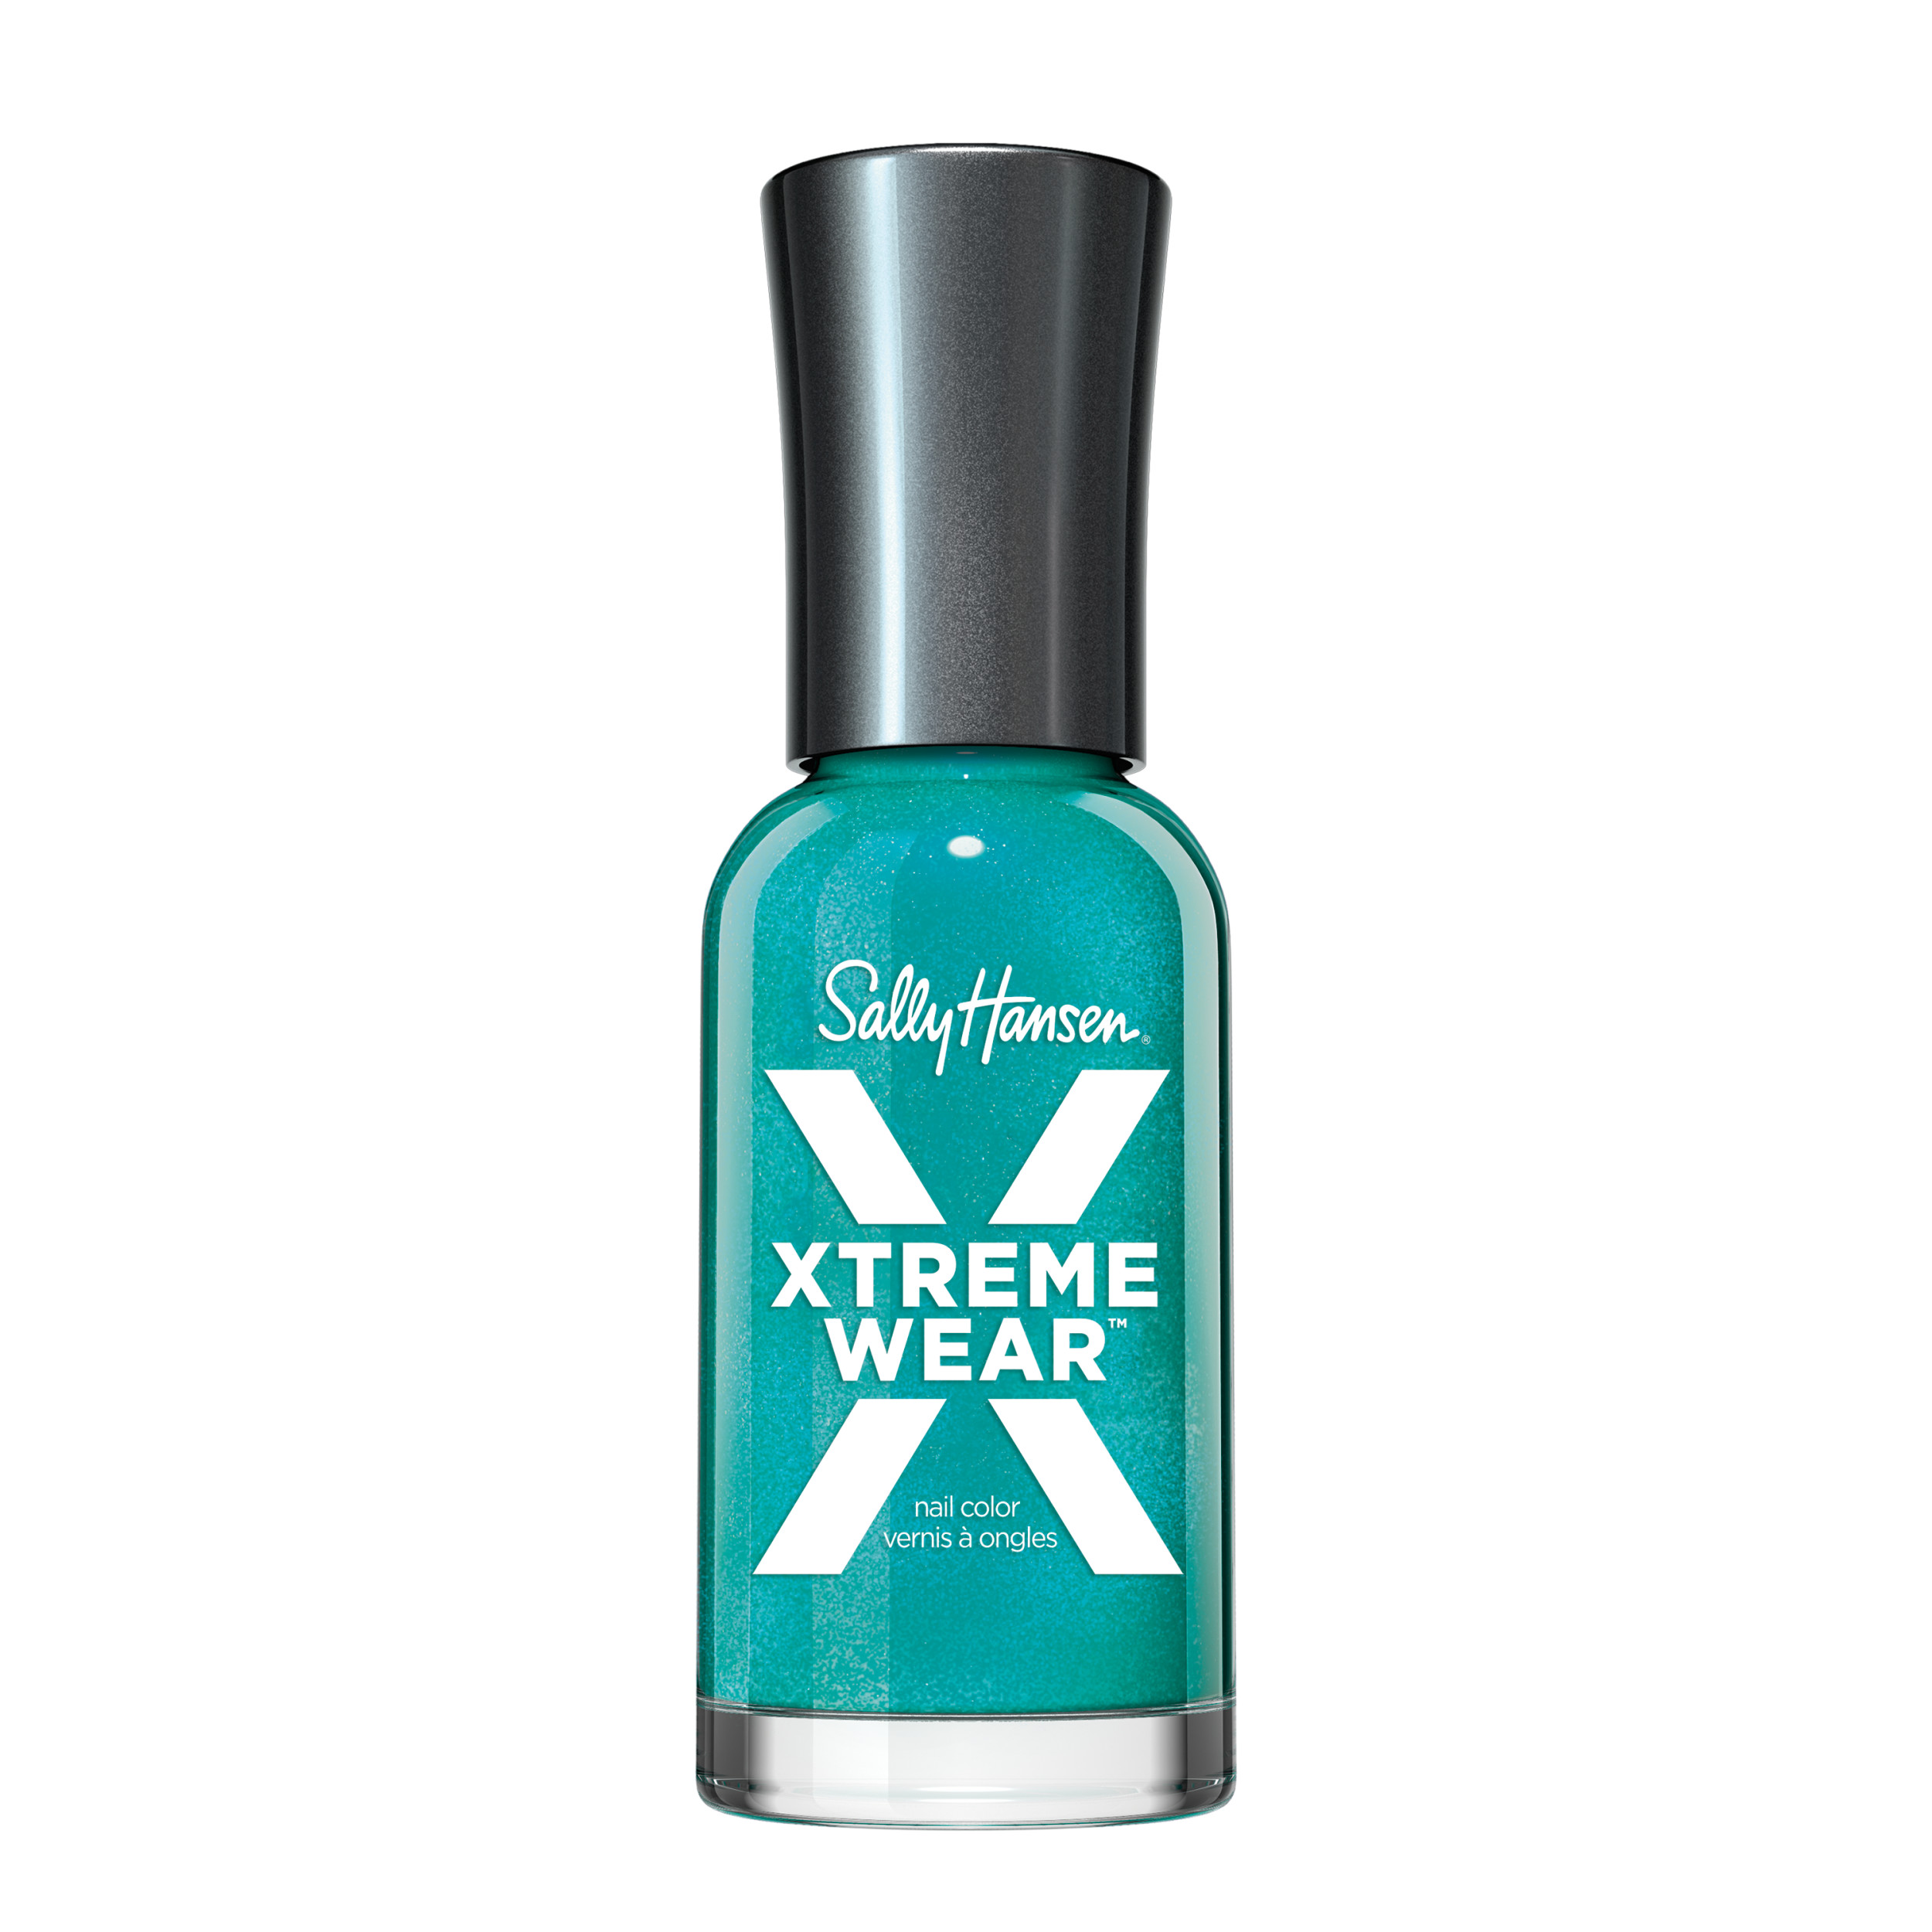 Sally Hansen Xtreme Wear Nail Color, Jazzy Jade, 0.4 oz, Color Nail Polish, Nail Polish, Quick Dry Nail Polish, Nail Polish Colors, Chip Resistant, Bold Color - image 1 of 10